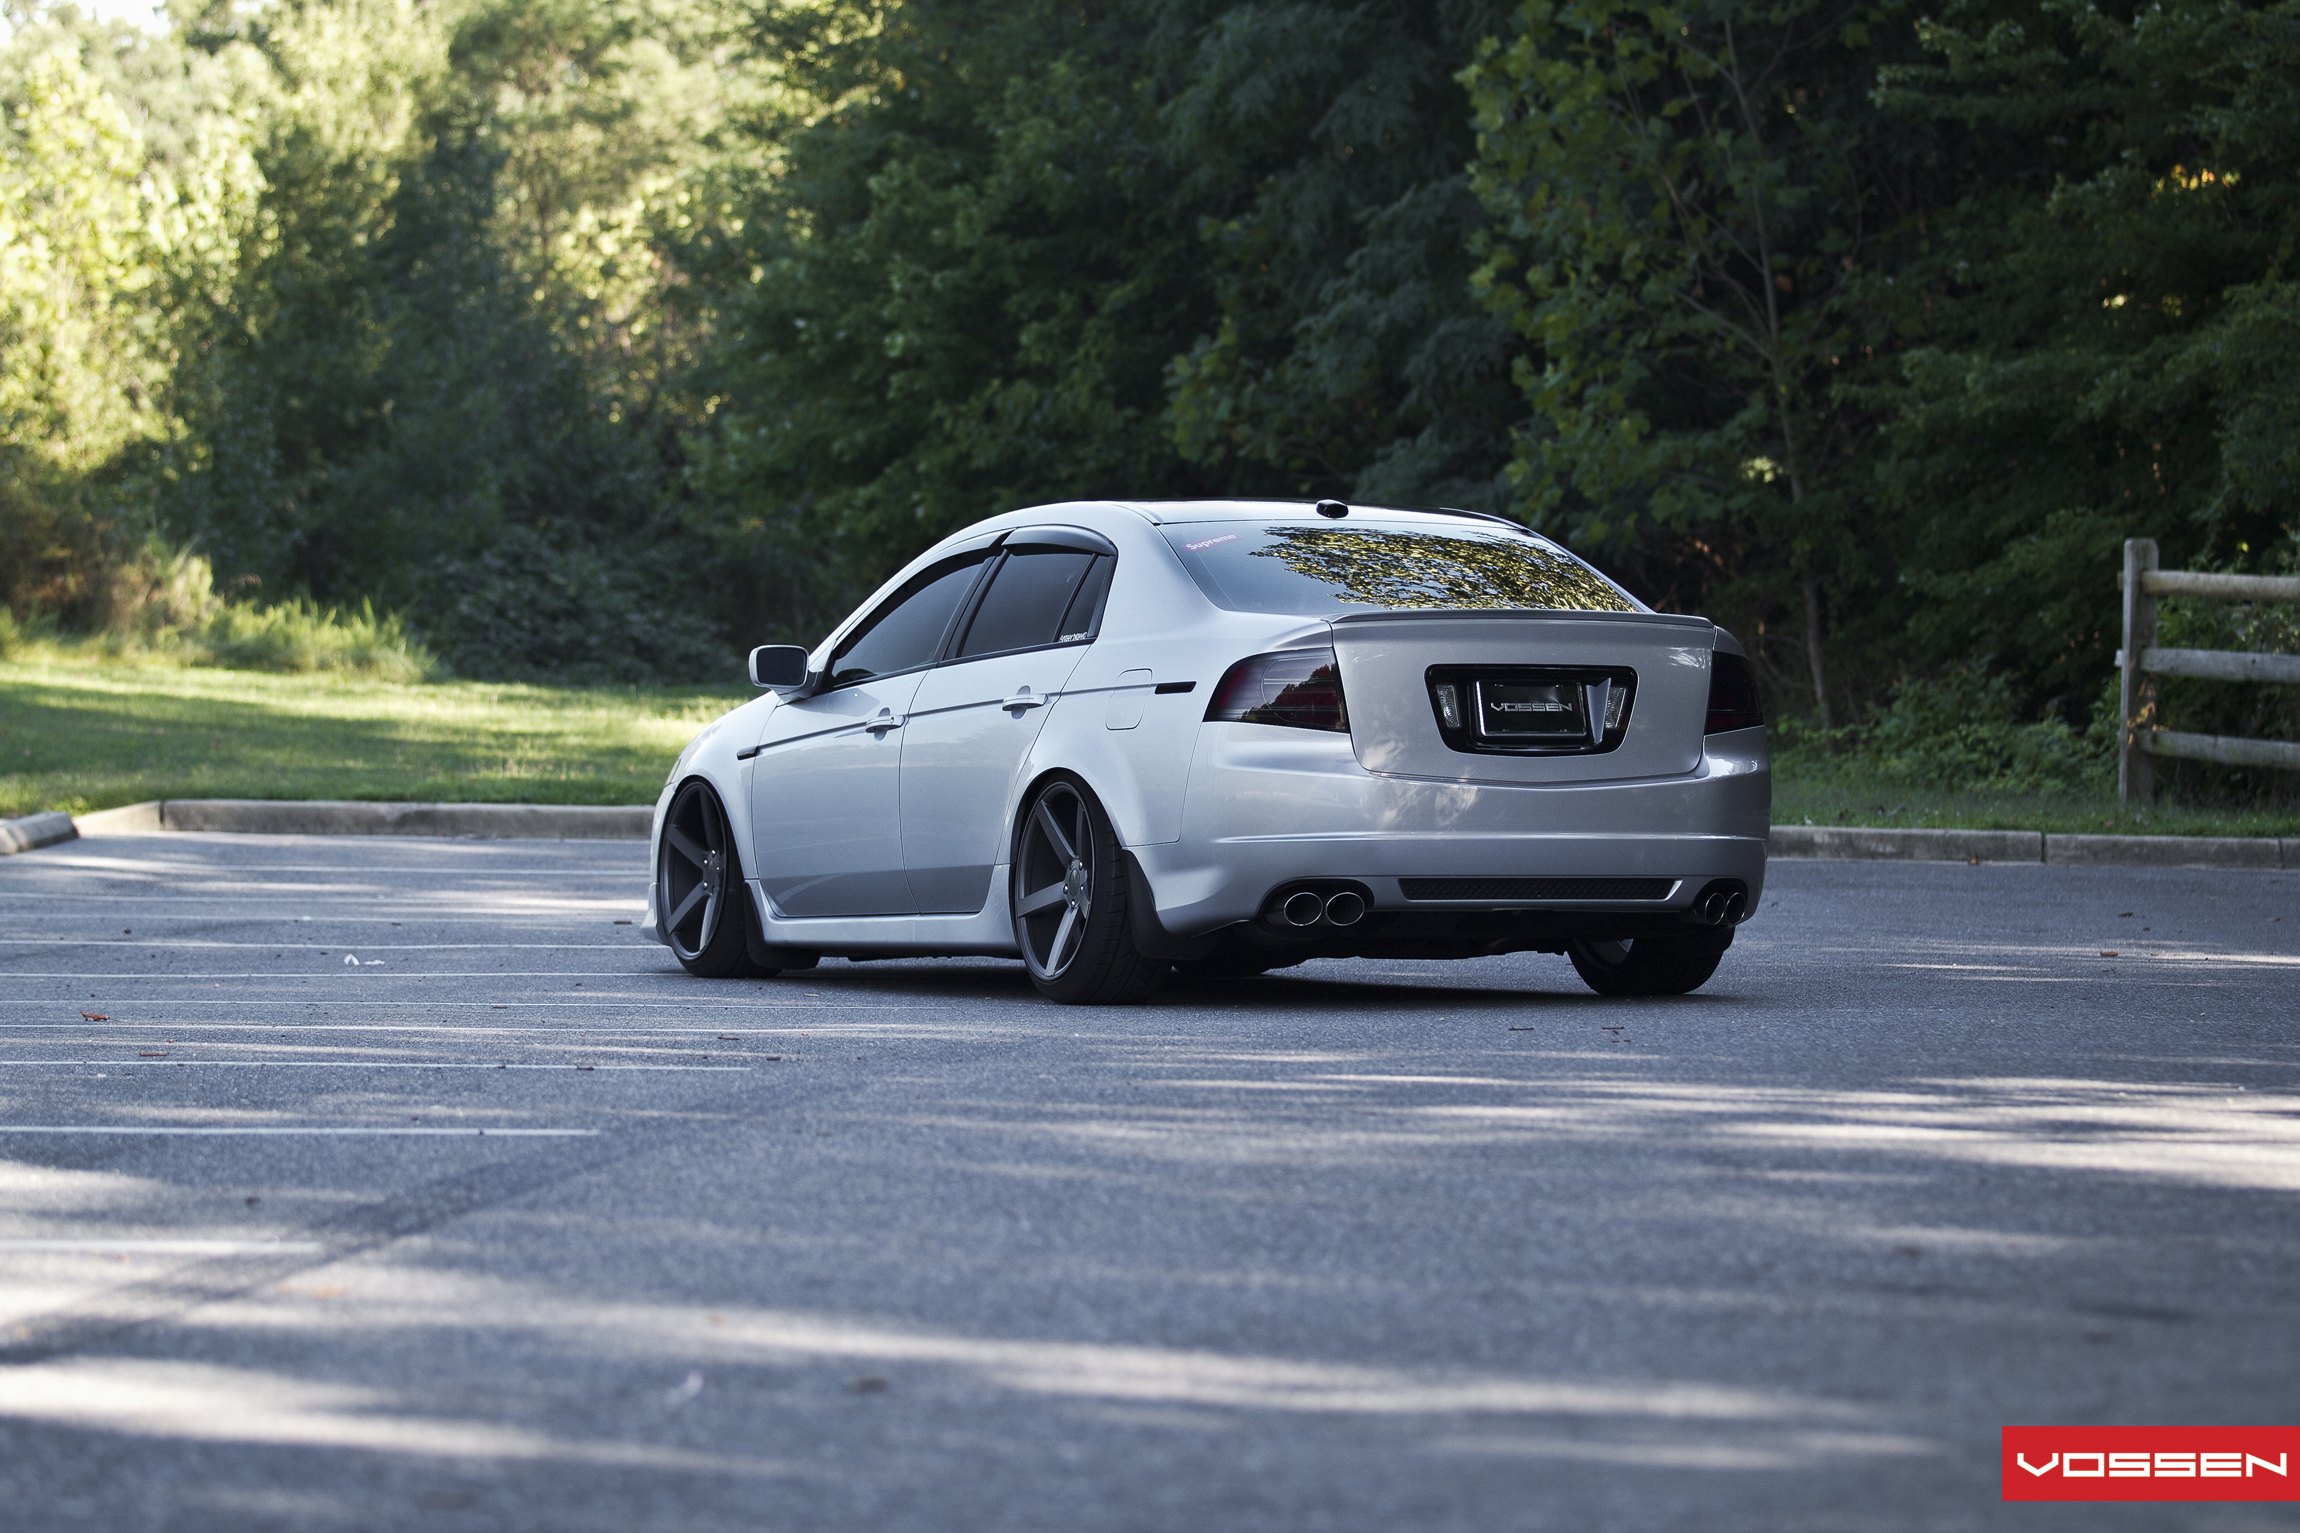 Dark Smoke Taillights on Silver Acura TL - Photo by Vossen